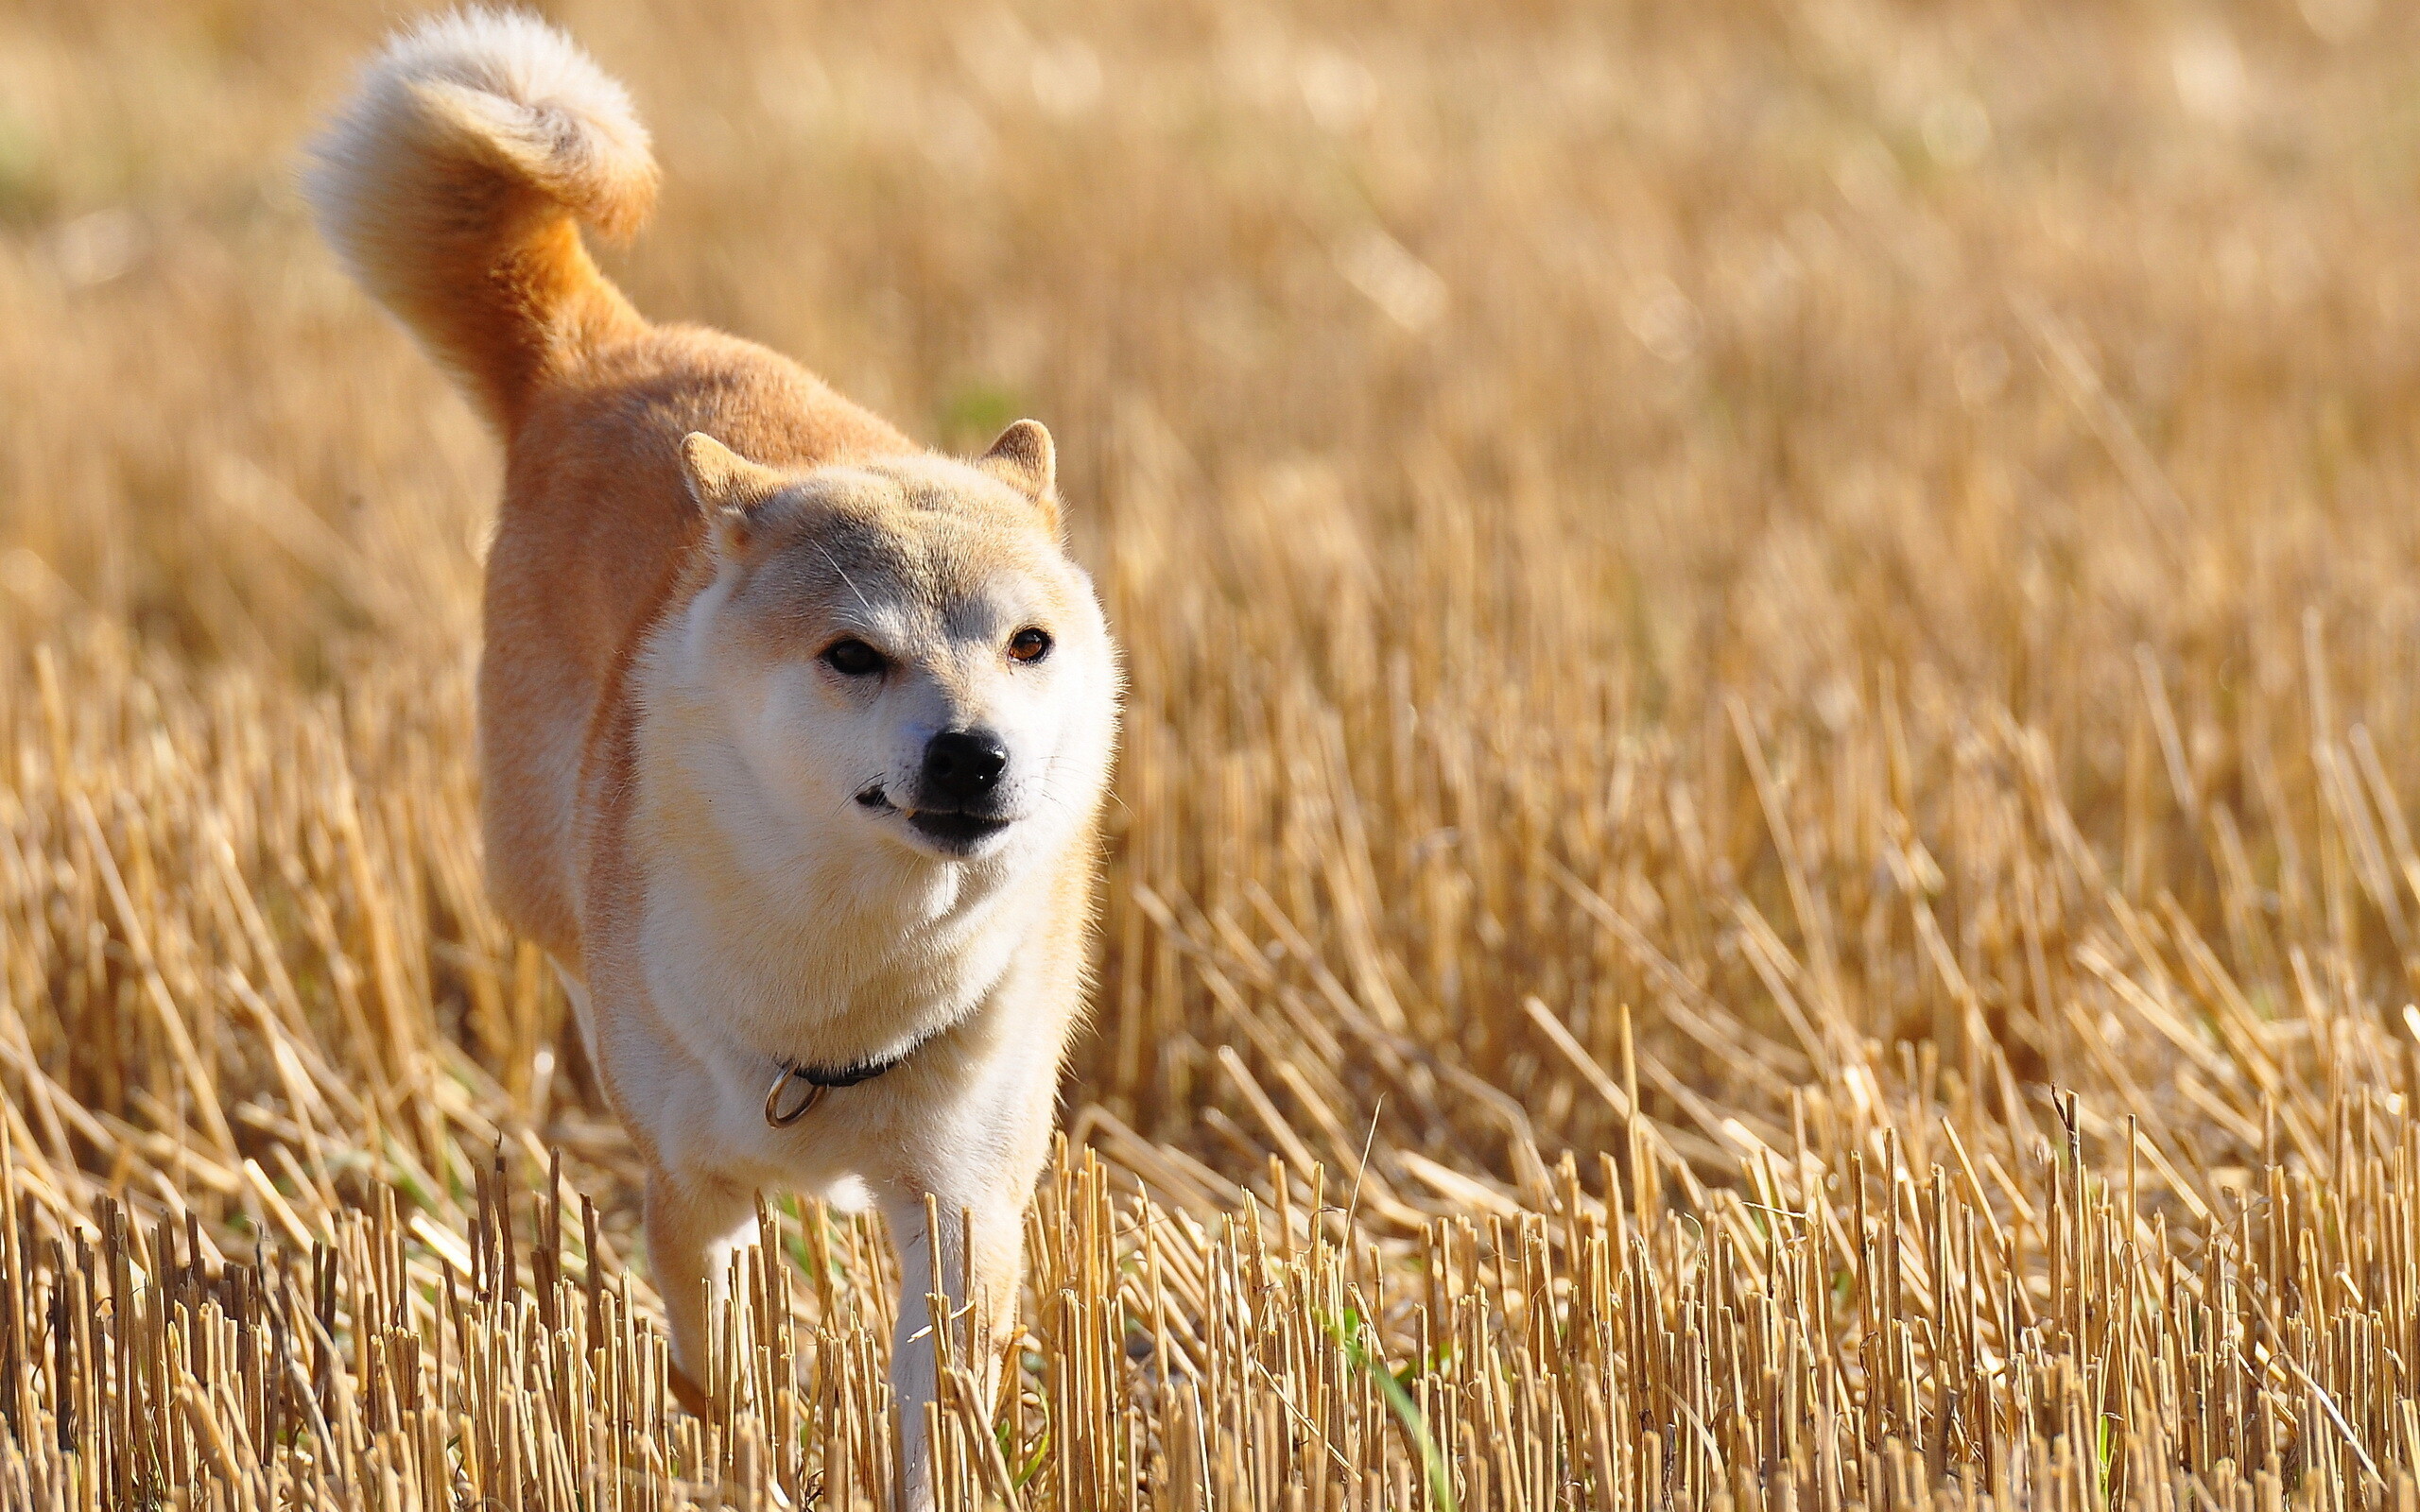 Shiba Inu: The breed with a distinct bloodline, temperament, and smaller size than other Japanese dog breeds. 2560x1600 HD Wallpaper.